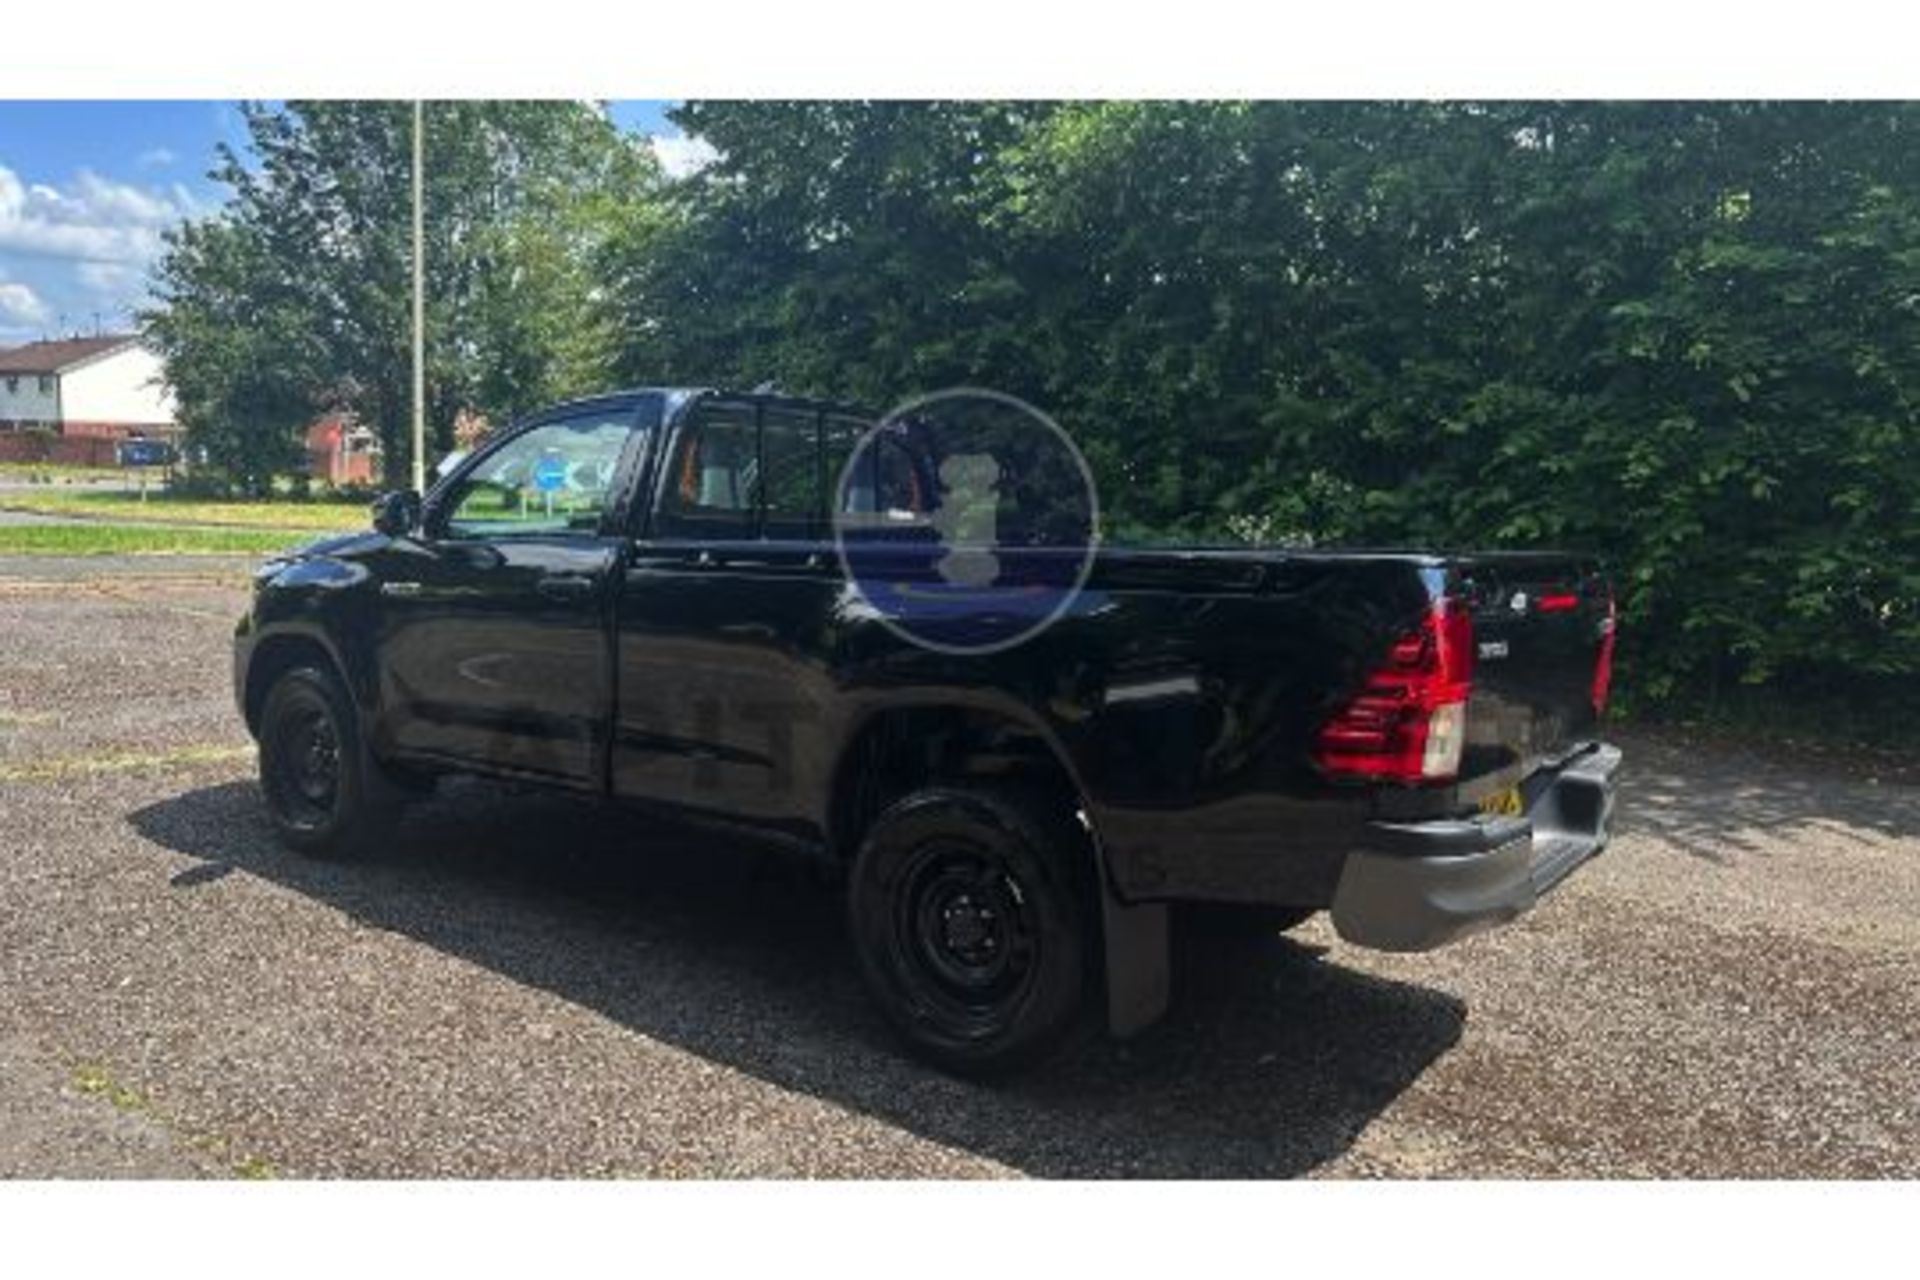 TOYOTA HILUX 2.4D-4D SINGLE CAB 4X4 PICK UP TRUCK - BLACK MODEL - 23 REG WITH DELIVERY MILES - WOW!! - Image 8 of 38